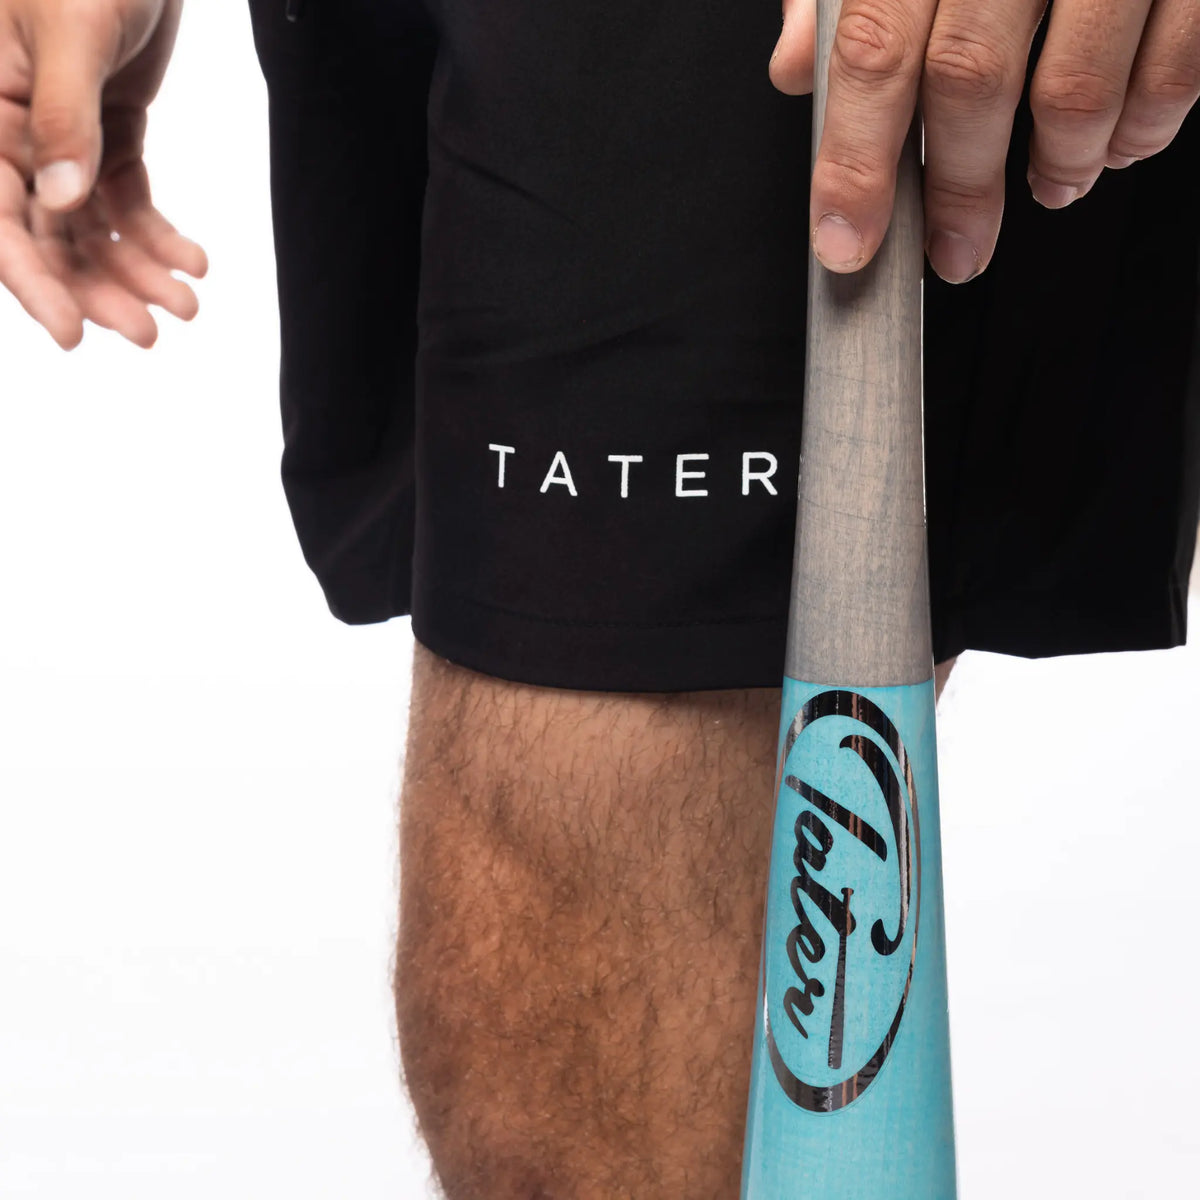 The image features a close-up view of a person wearing black athletic shorts with the word &quot;TATER&quot; printed on them, indicating they are part of a sports or athletic wear collection. The individual is also holding a light blue baseball bat, which is partially visible in the shot. The focus on the branded shorts and the bat suggests that the image might be used for promotional purposes to highlight the brand&#39;s association with baseball and athletic gear.